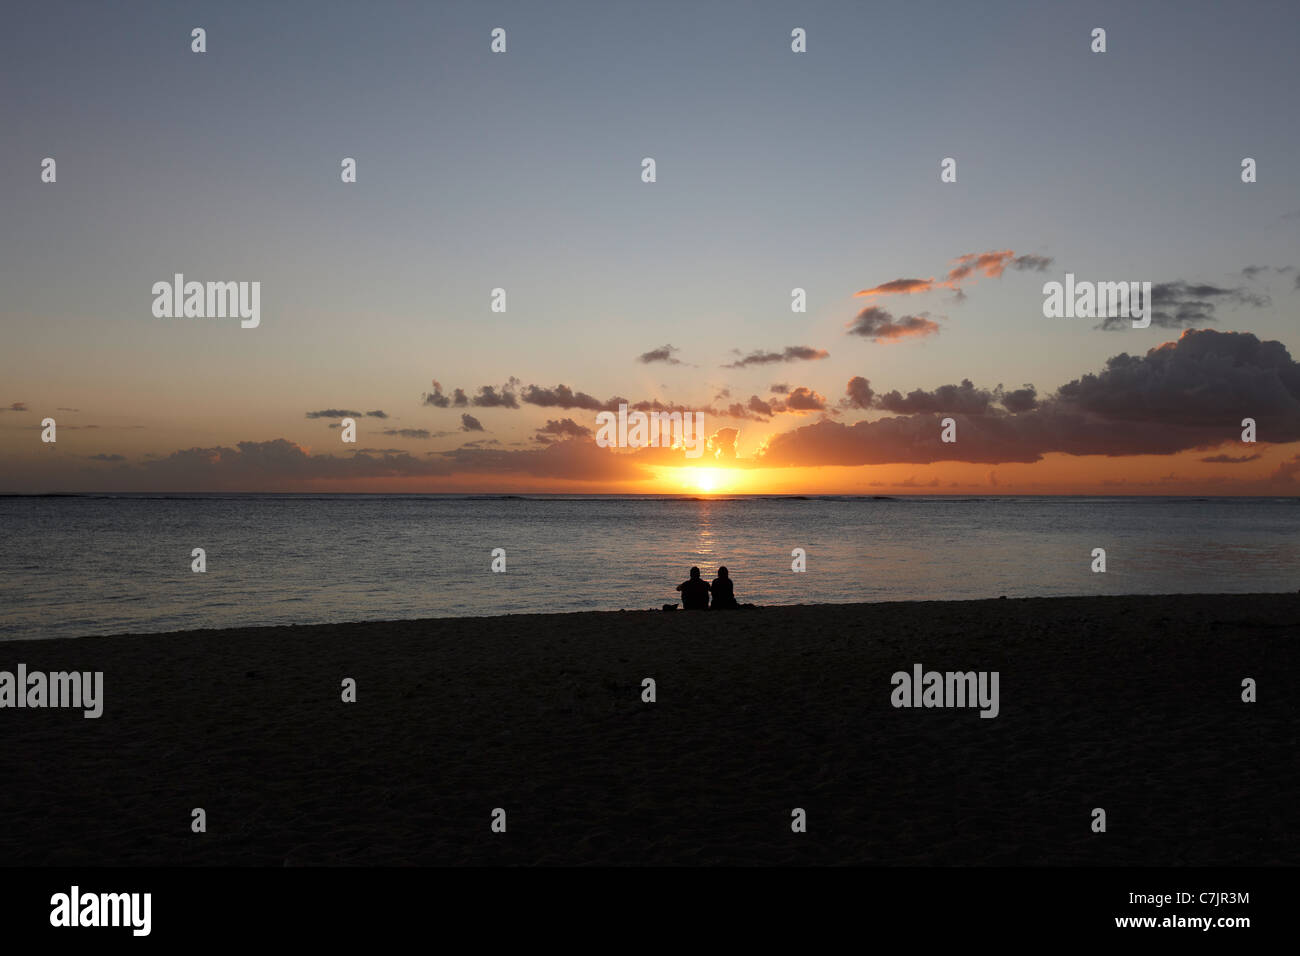 Couple sitting on beach at sunset Banque D'Images